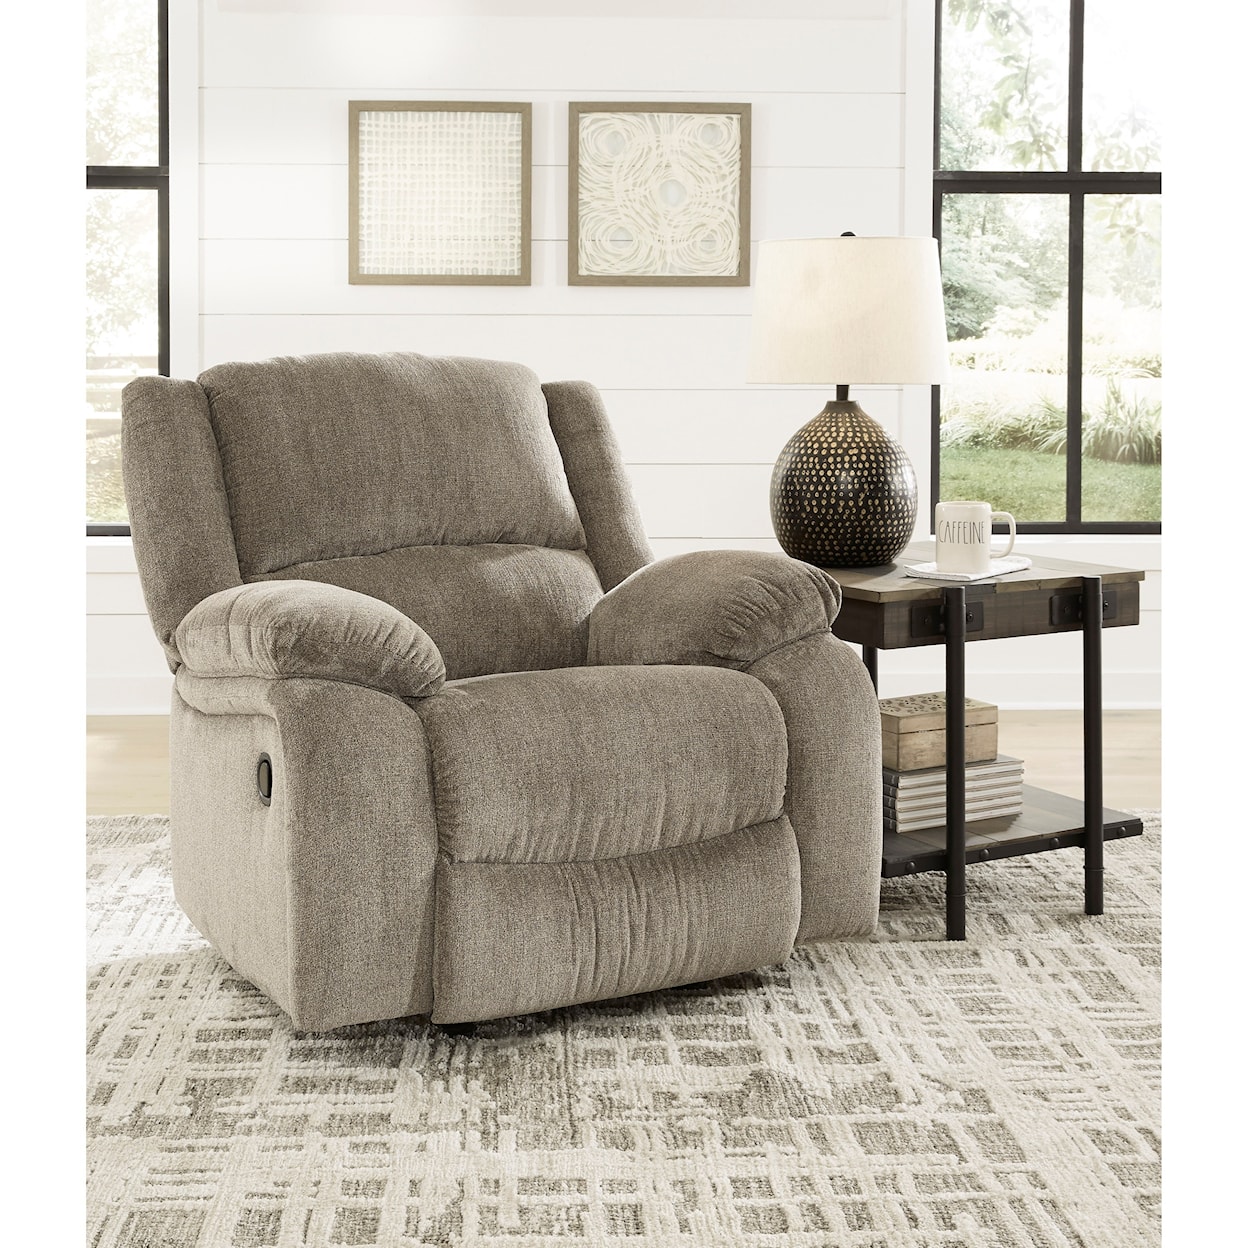 Signature Design by Ashley Draycoll Rocker Recliner